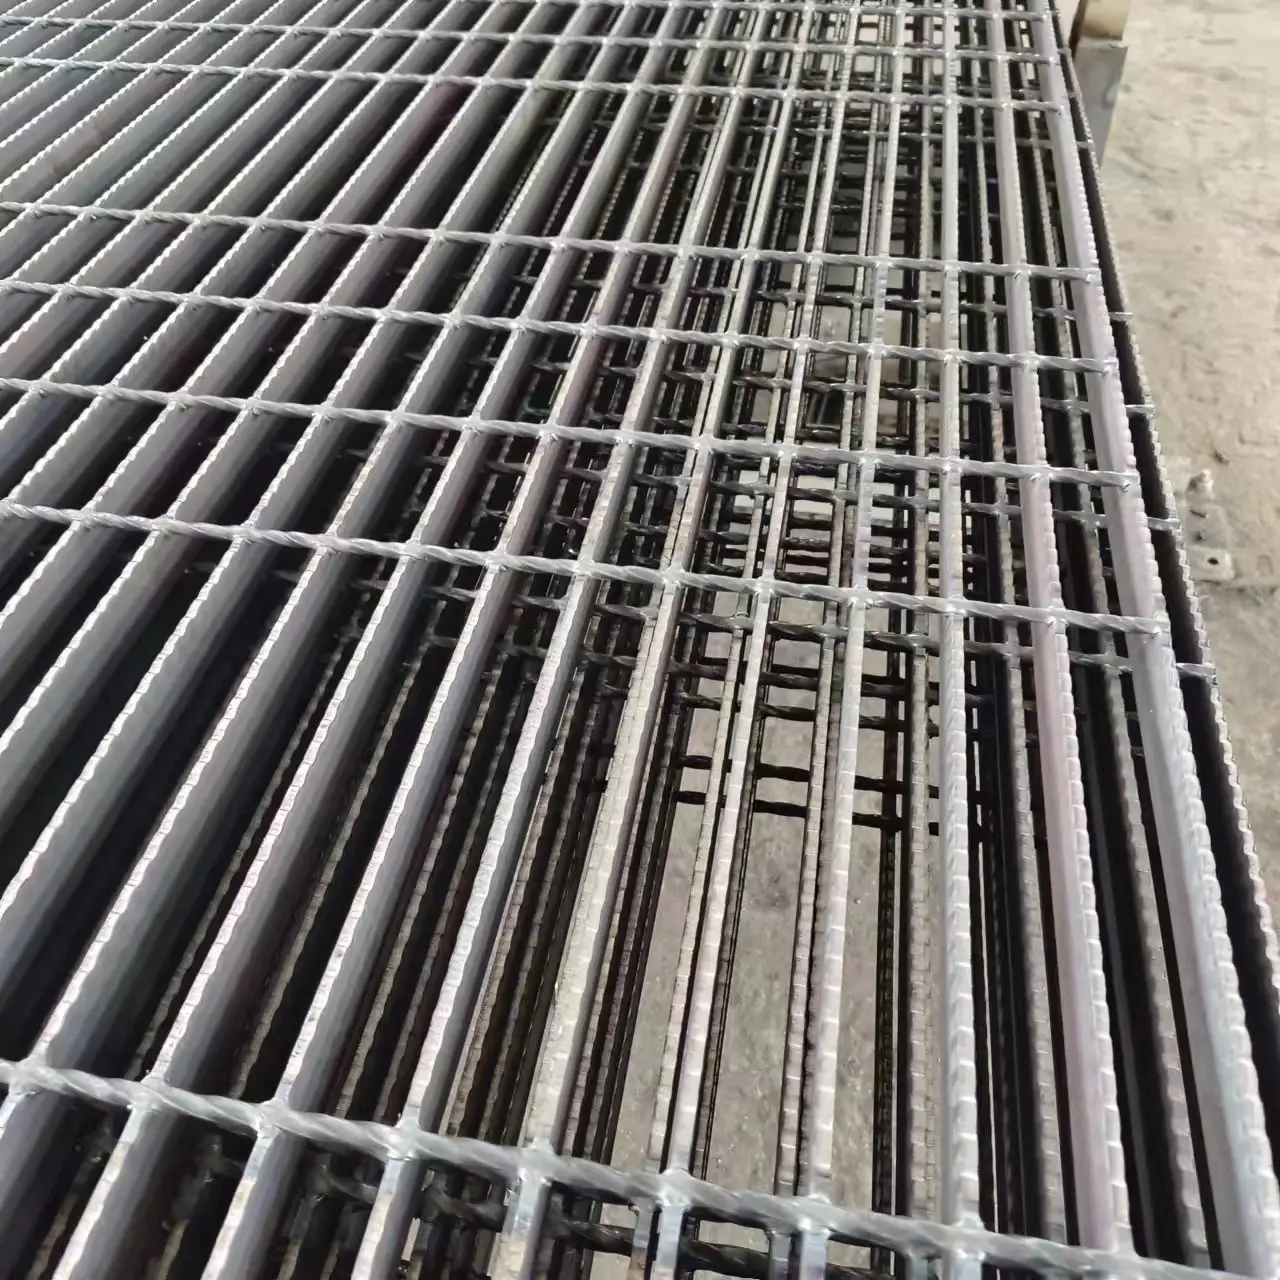 Hot-dip galvanized steel grating, waterway, car wash manhole cover, grating, walkway, drain ditch cover